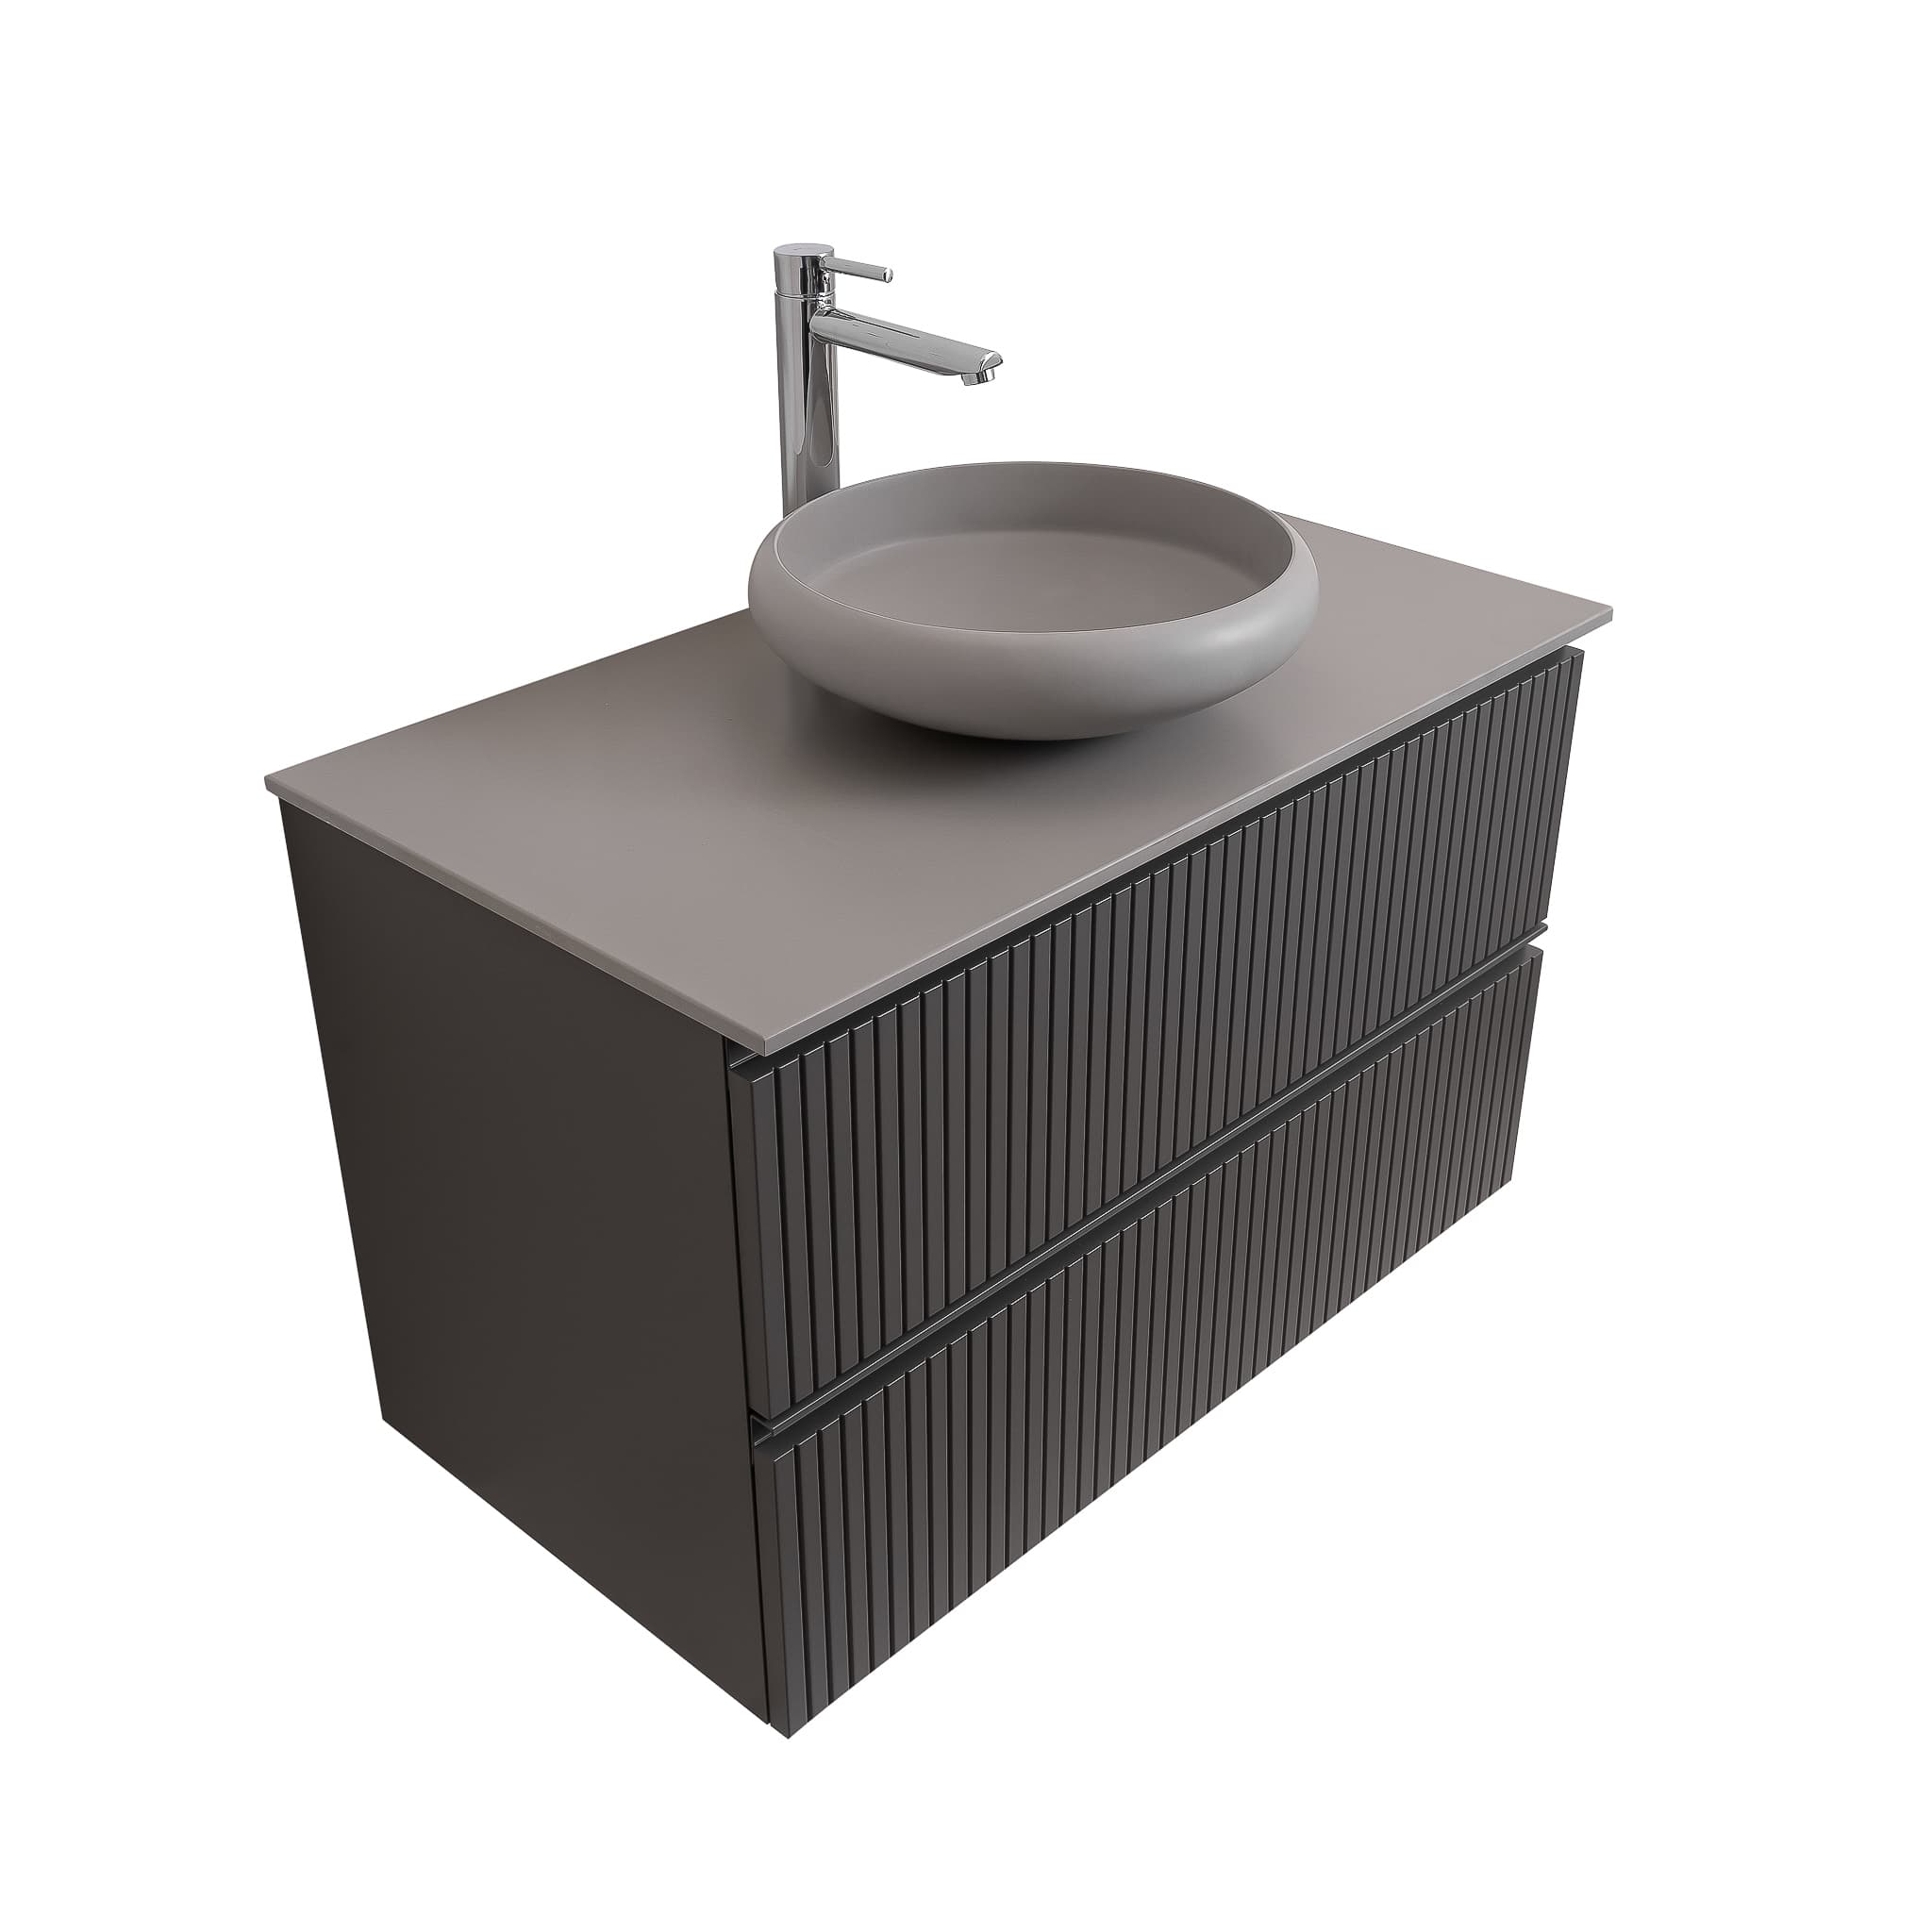 Ares 31.5 Matte Grey Cabinet, Solid Surface Flat Grey Counter And Round Solid Surface Grey Basin 1153, Wall Mounted Modern Vanity Set